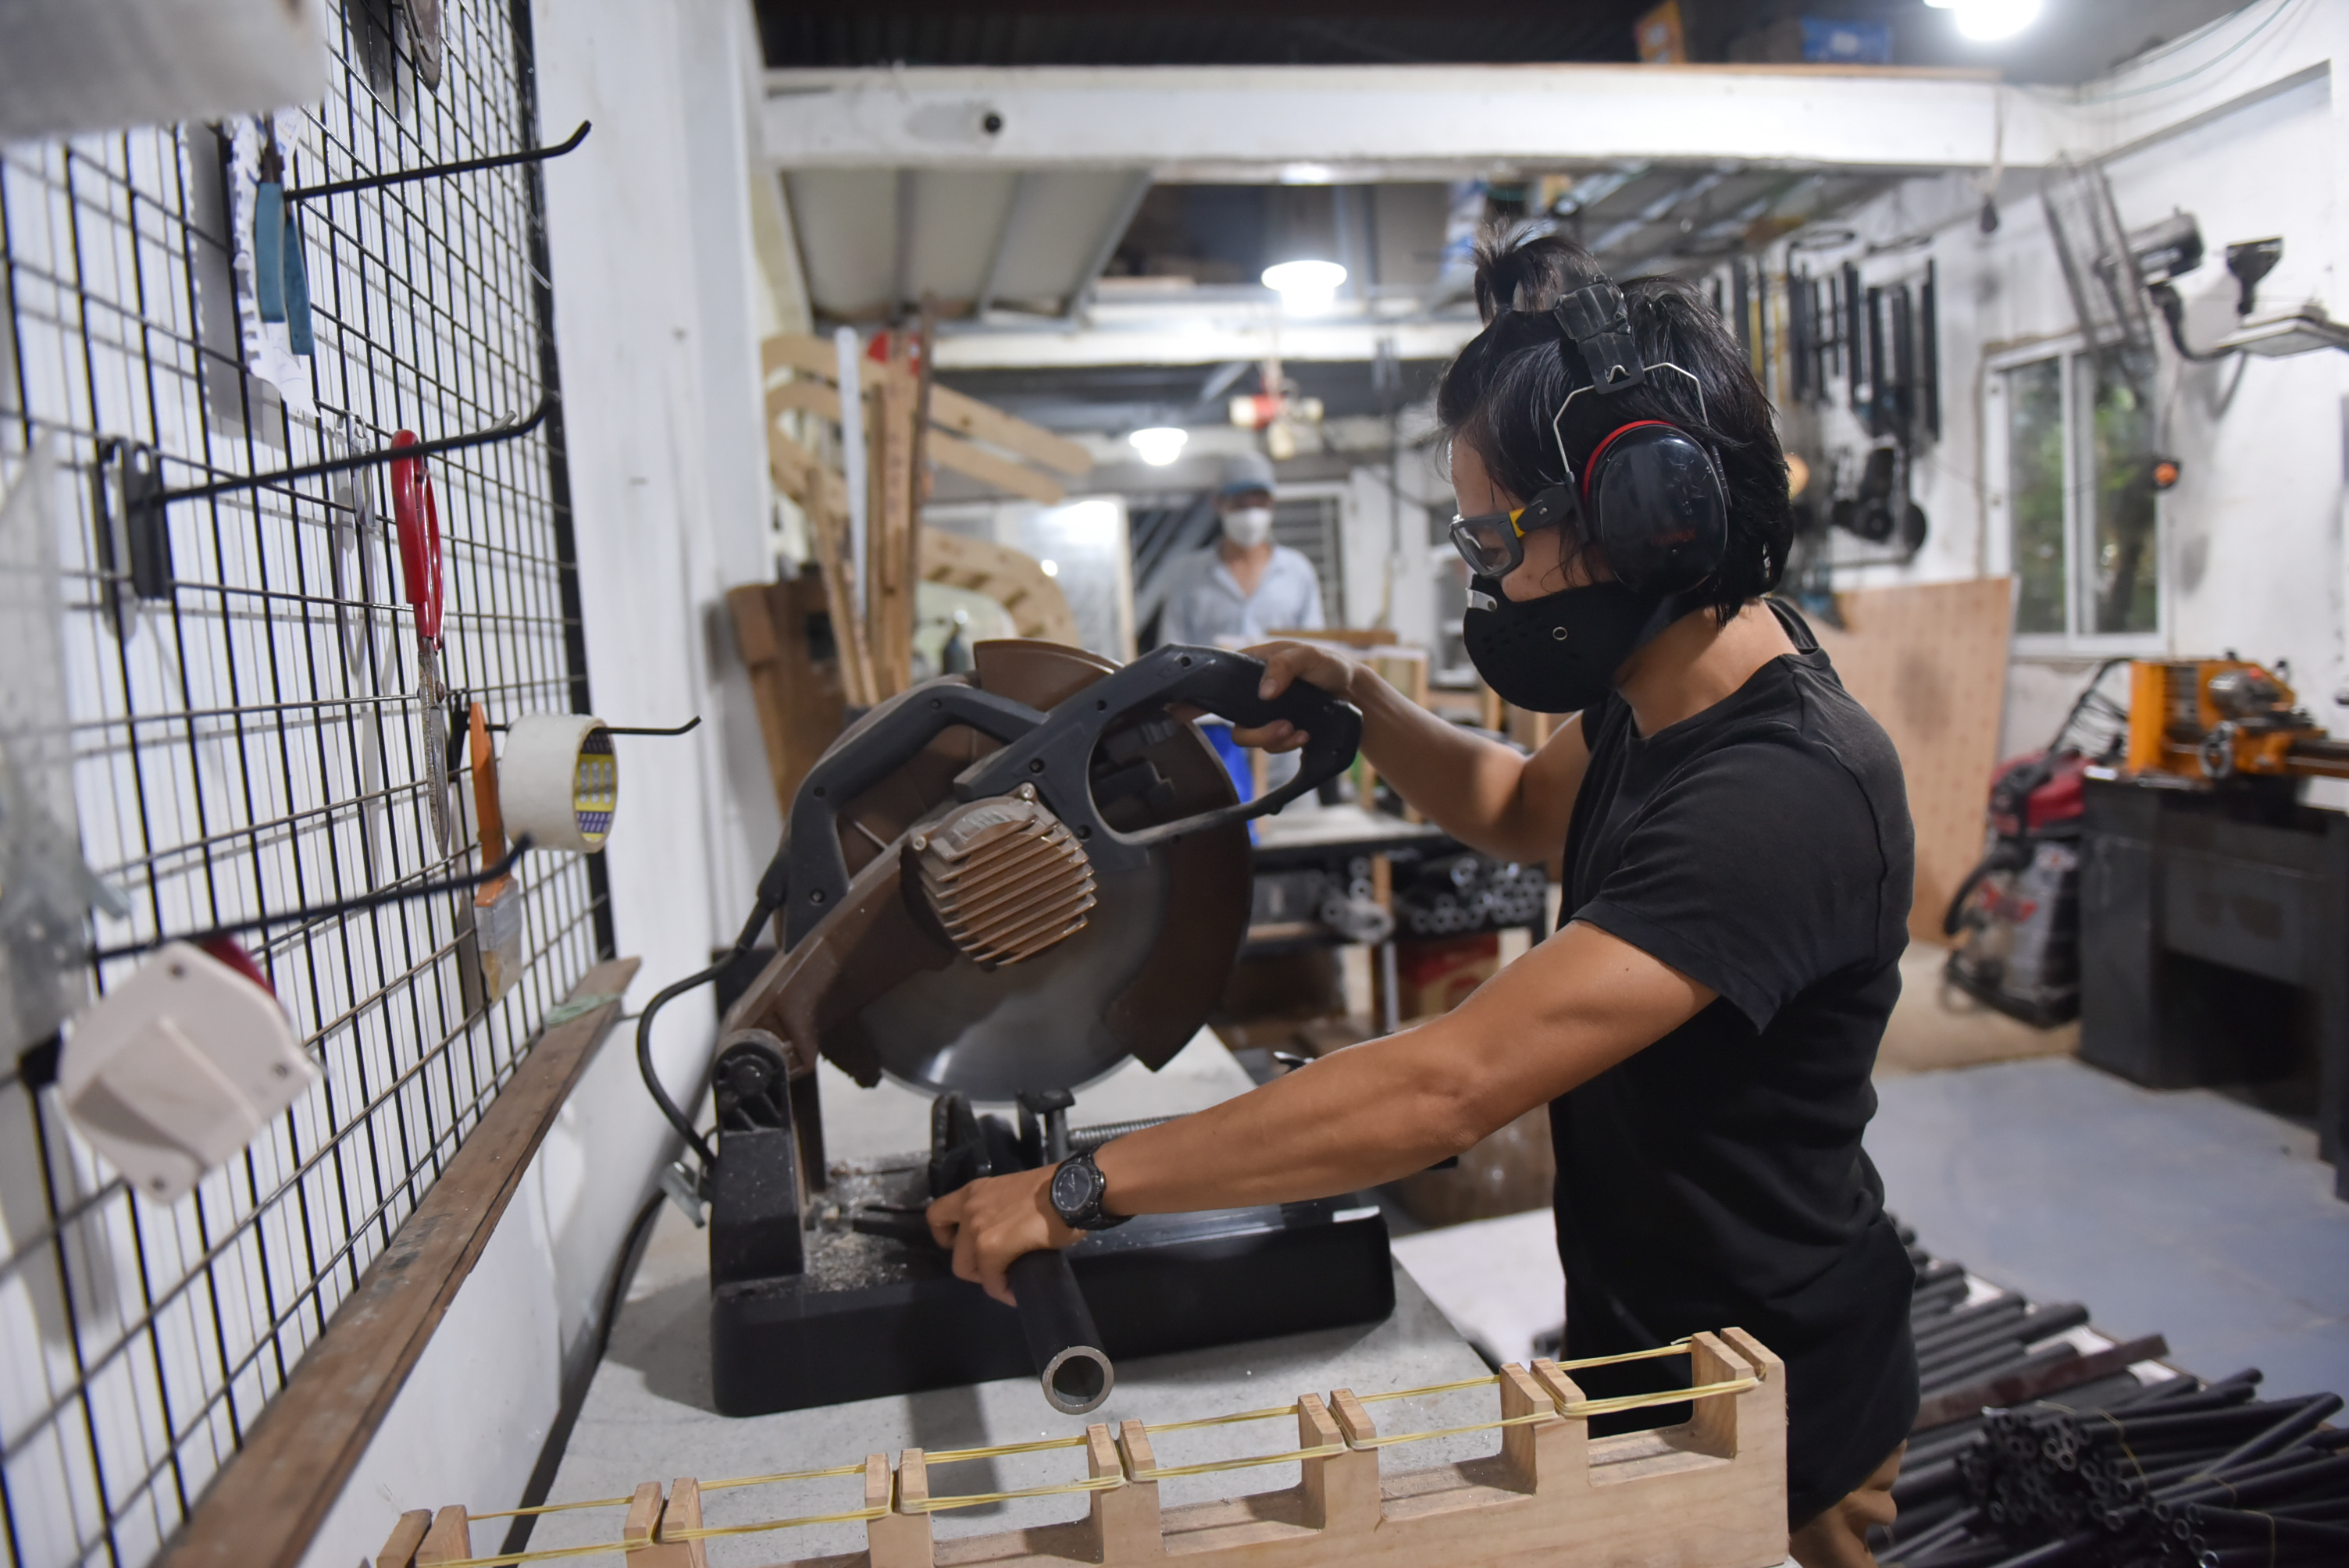 Tran Ngoc Hong Duc cuts a tube to create a set of wind chimes at his workshop in Binh Thanh District in Ho Chi Minh City. Photo: Ngoc Phuong / Tuoi Tre News